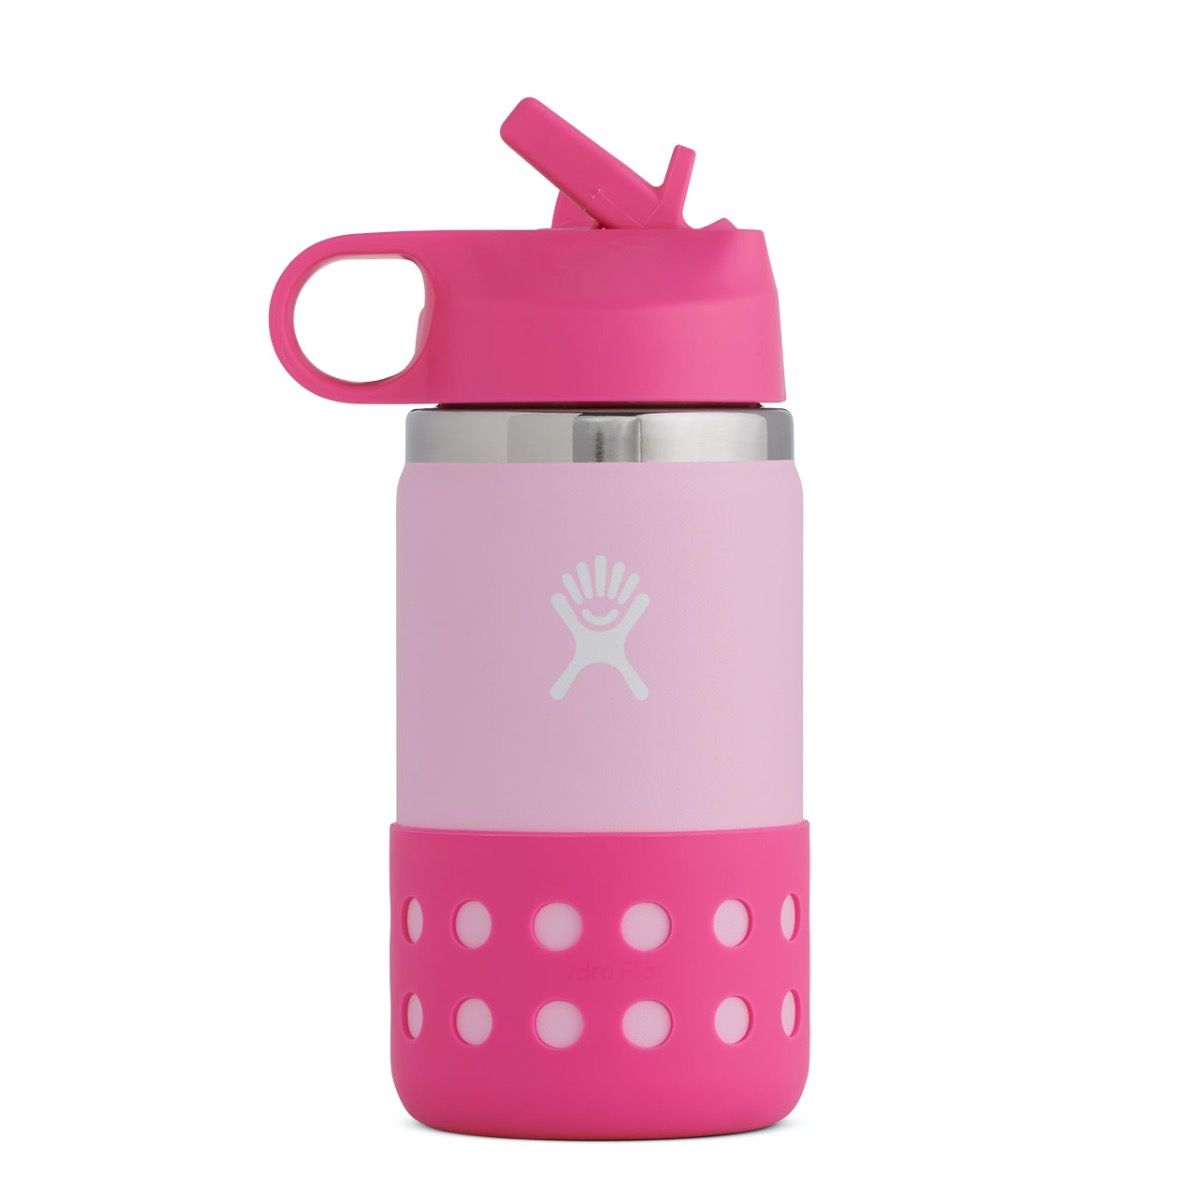 Pad For Kids Ages 8-12 Hand The Flower Household Water Bottle